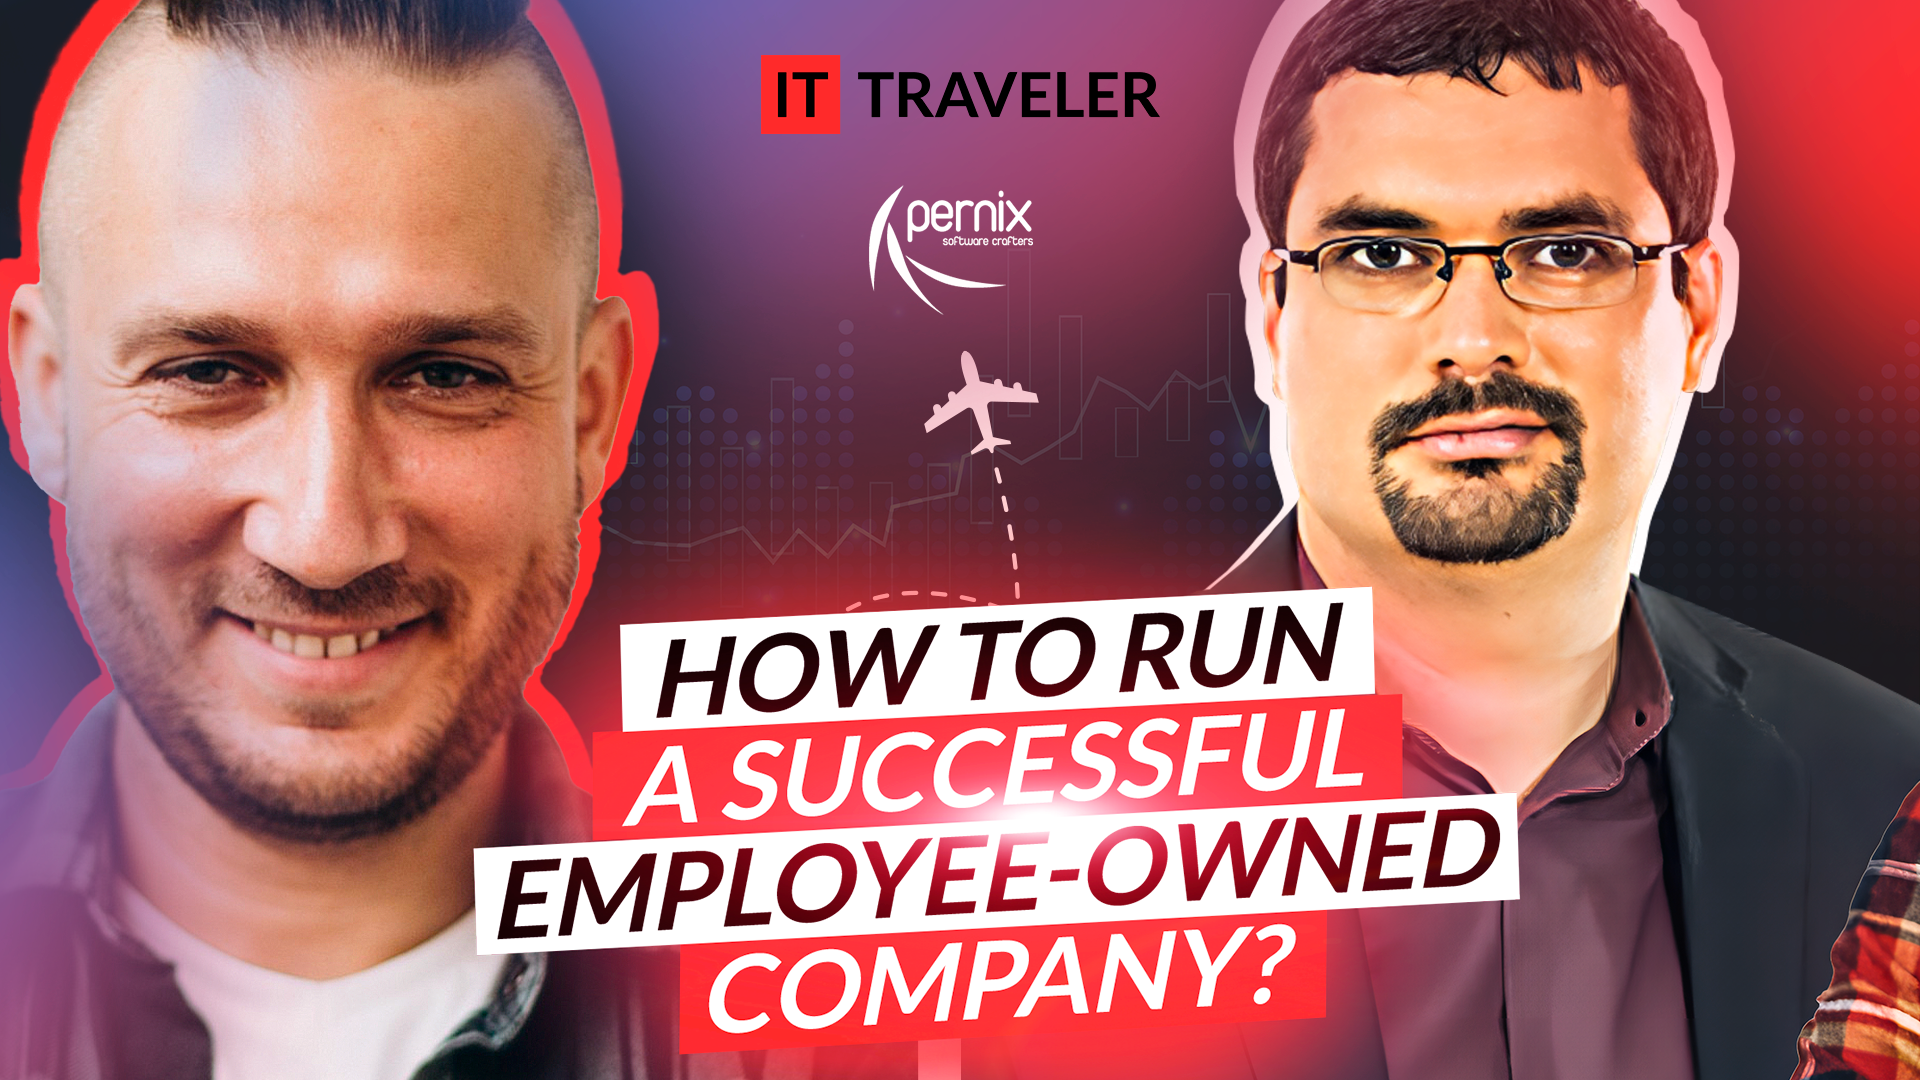 IT Traveler with Carlos Sirias, CEO at Pernix Solutions